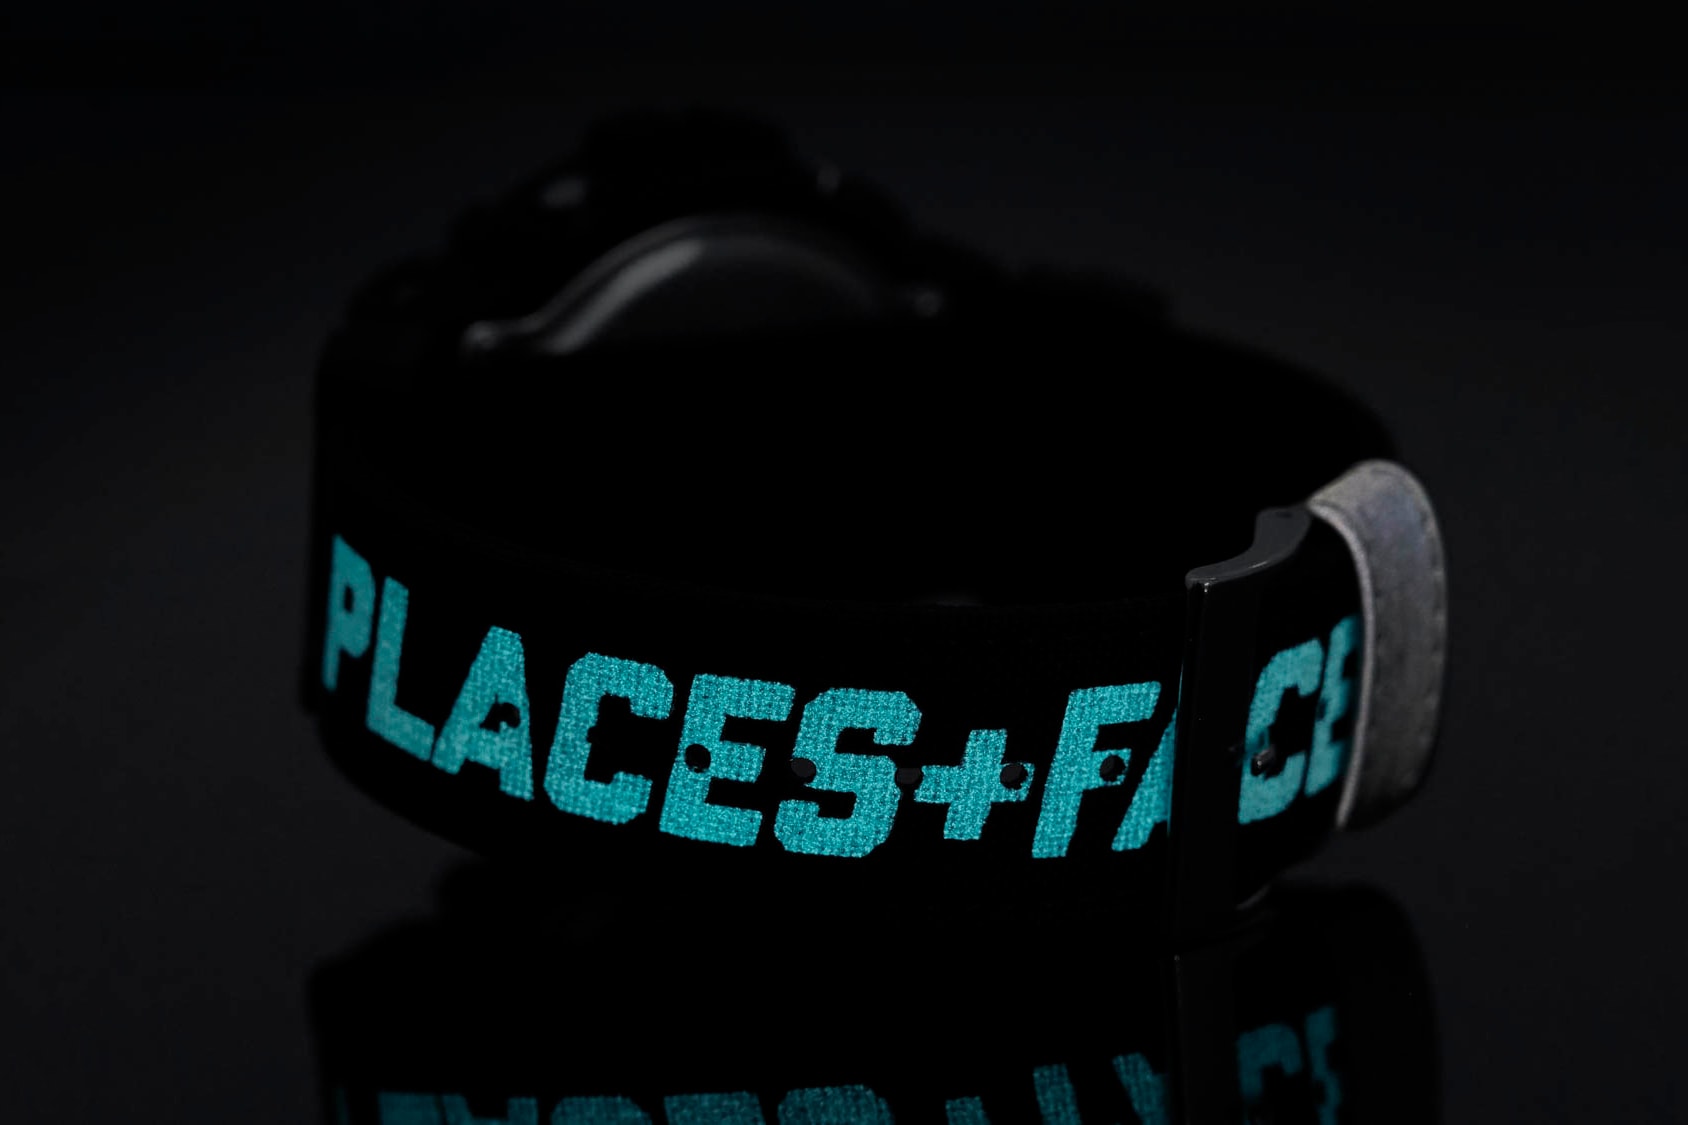 Places+Faces x G-Shock 聯乘 DW-6900 腕錶香港區發售情報